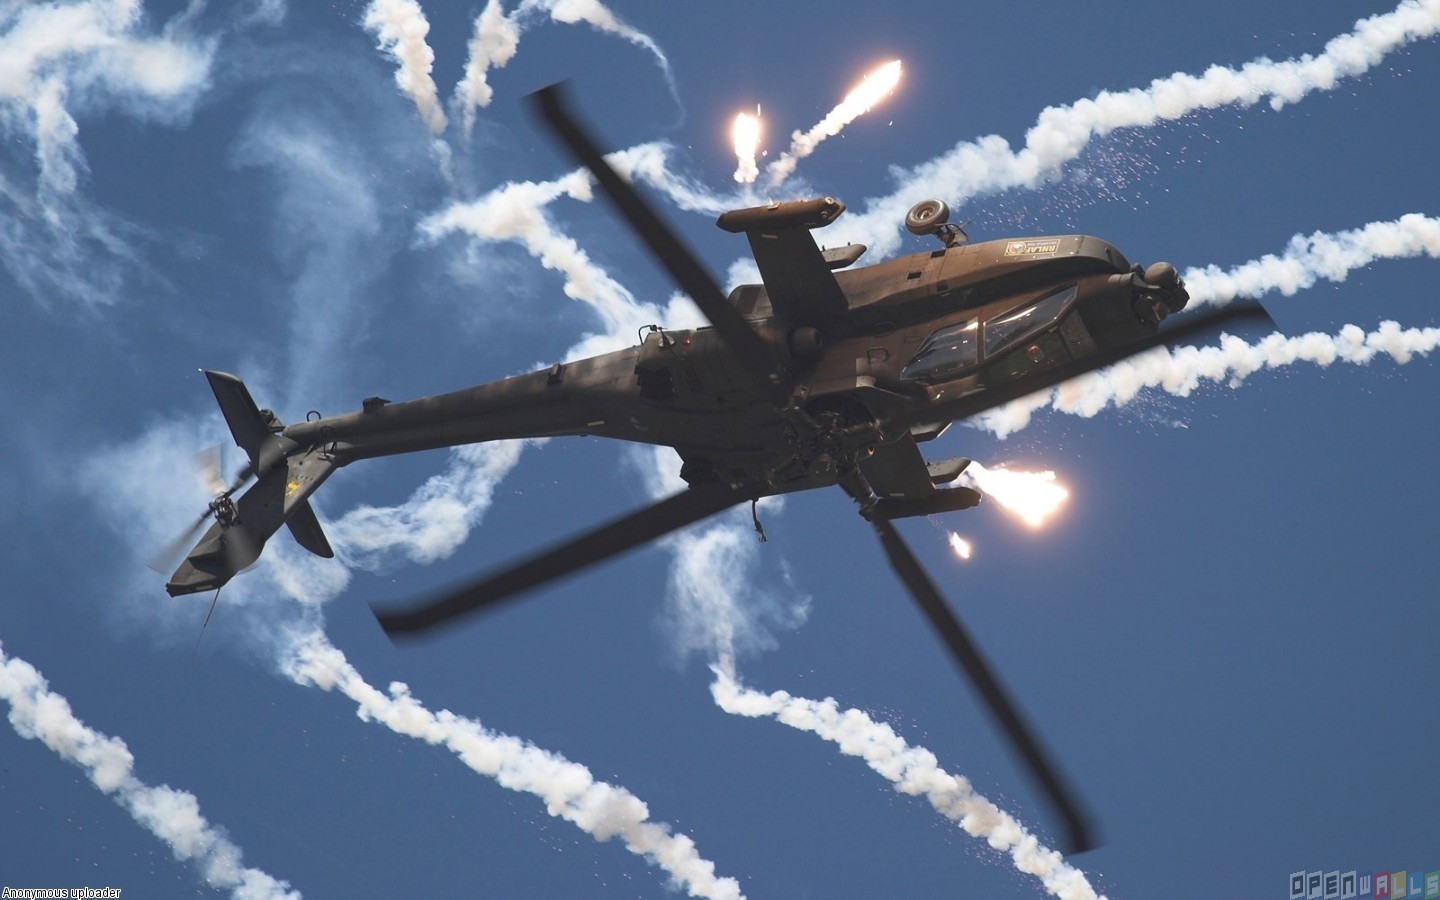 Apache attack helicopter wallpaper 647   Open Walls 1440x900